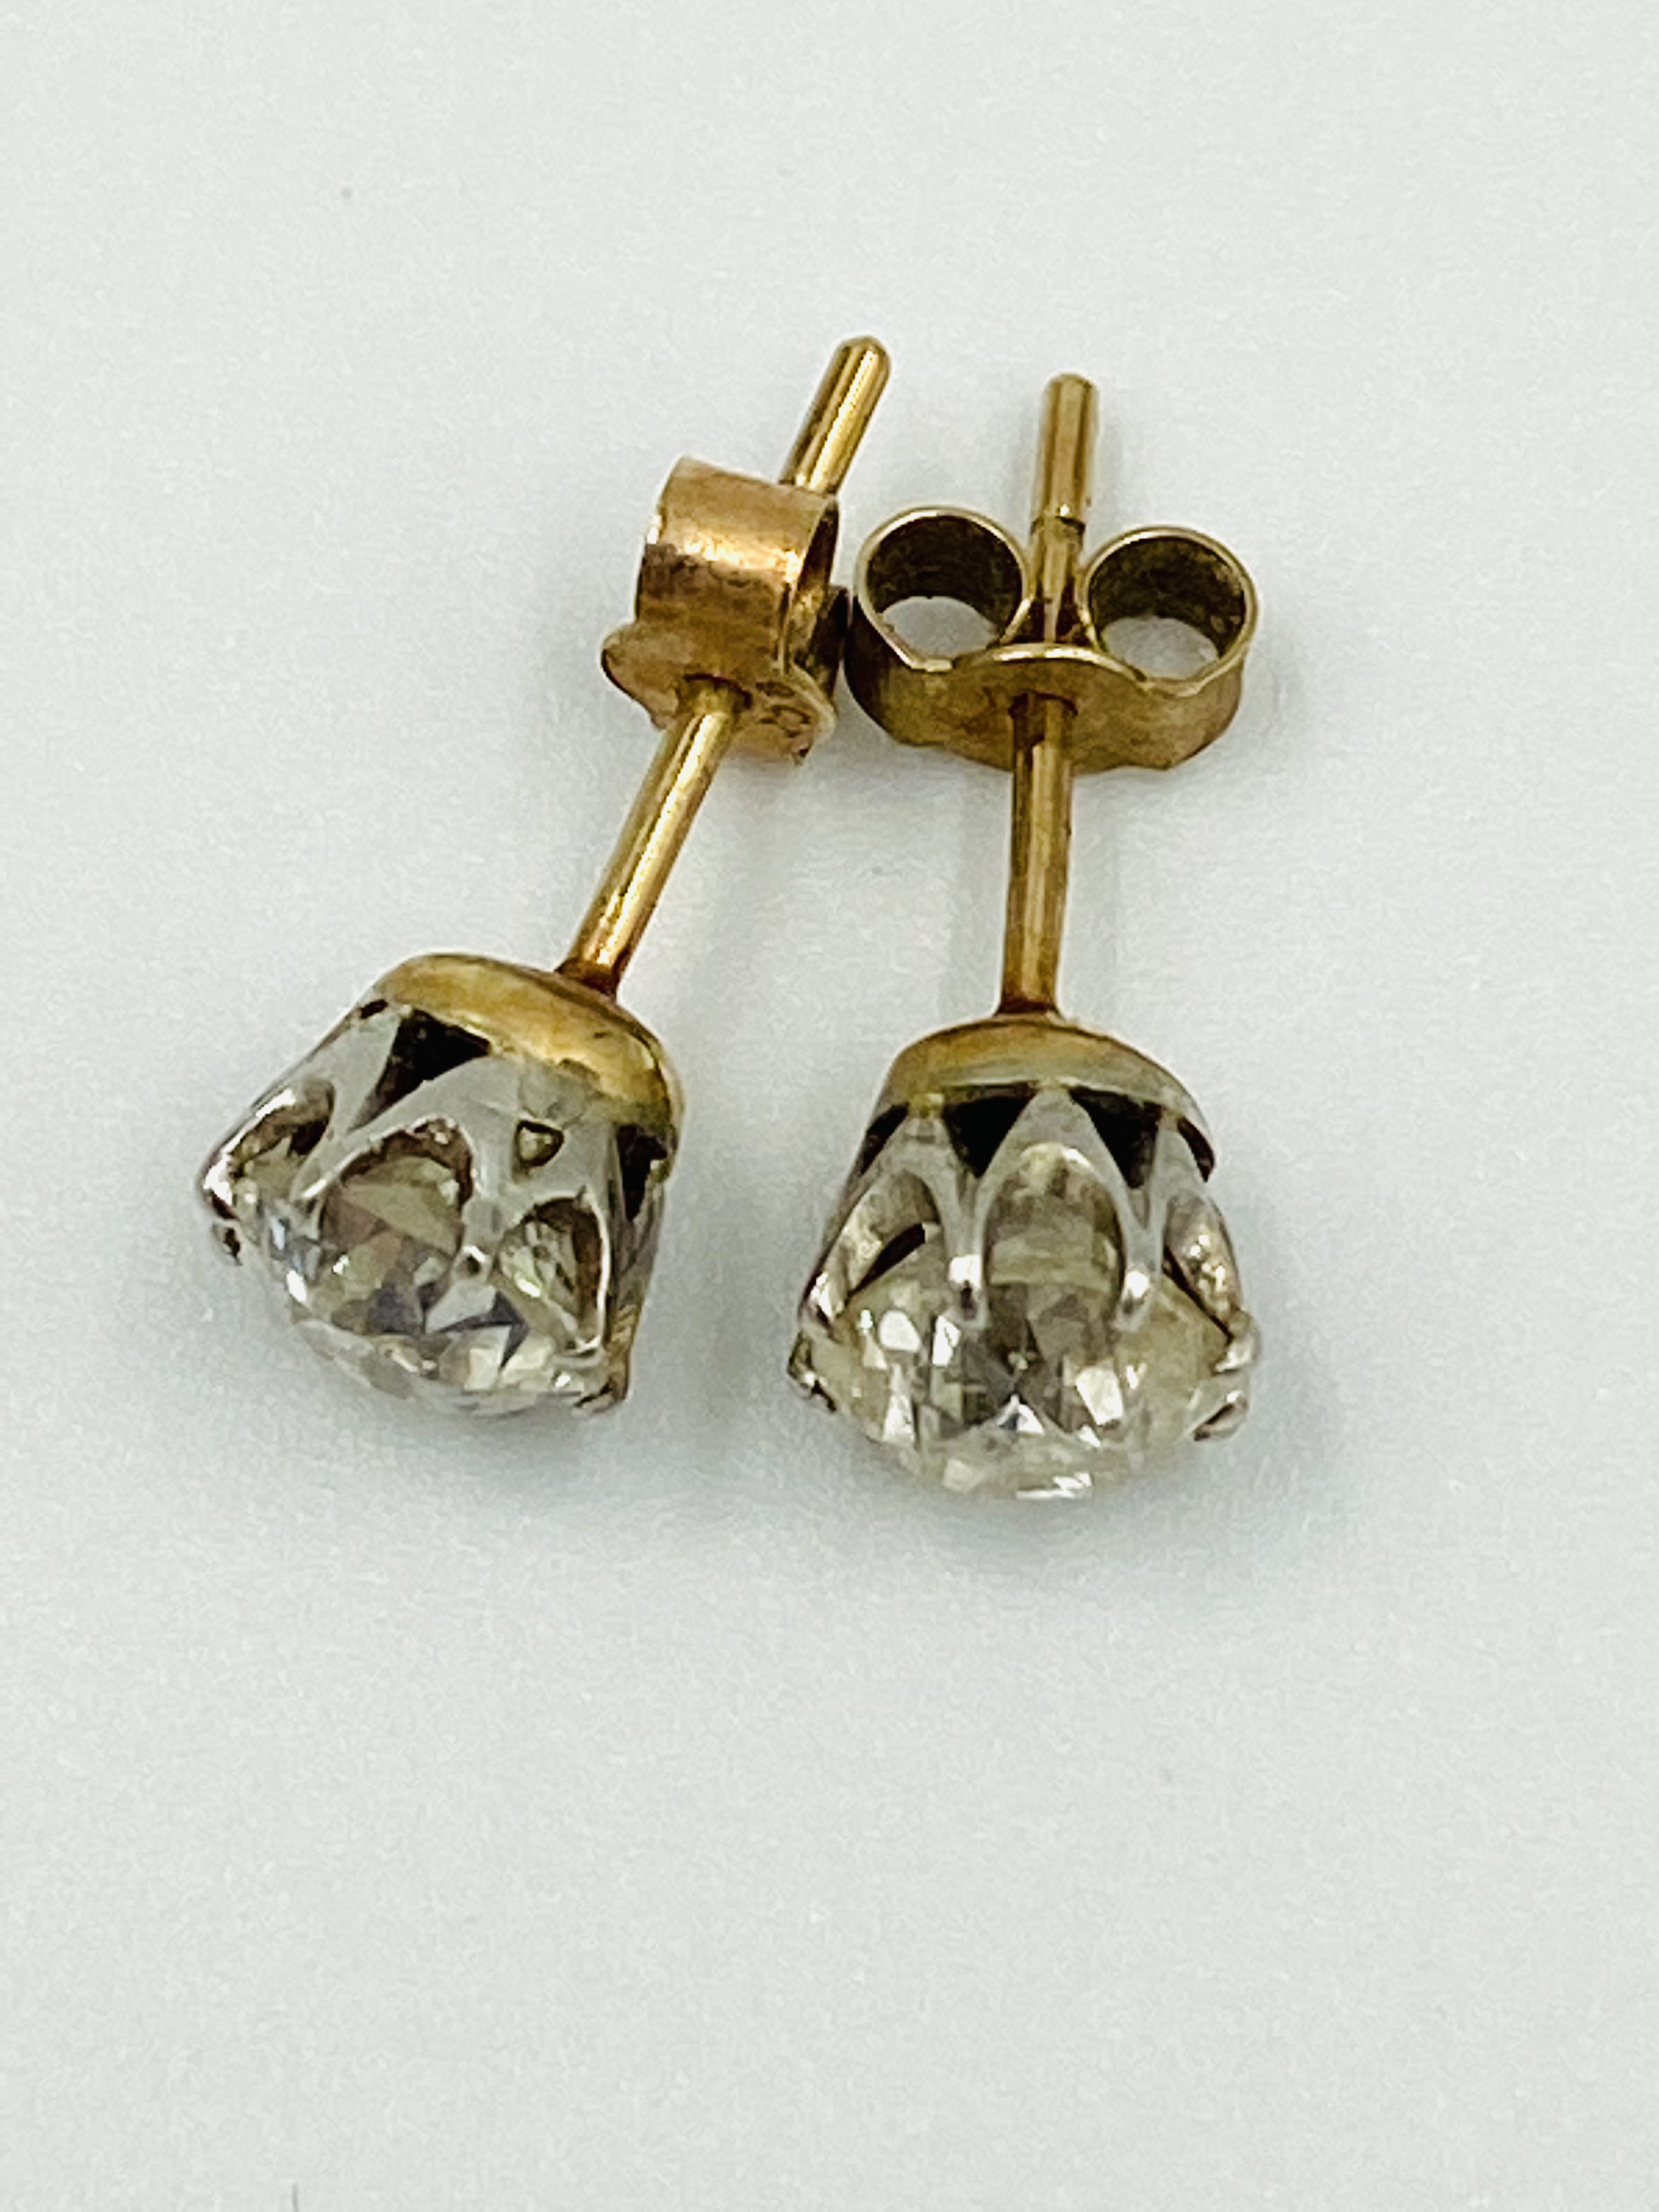 Pair of 9ct gold and diamond earrings - Image 2 of 4